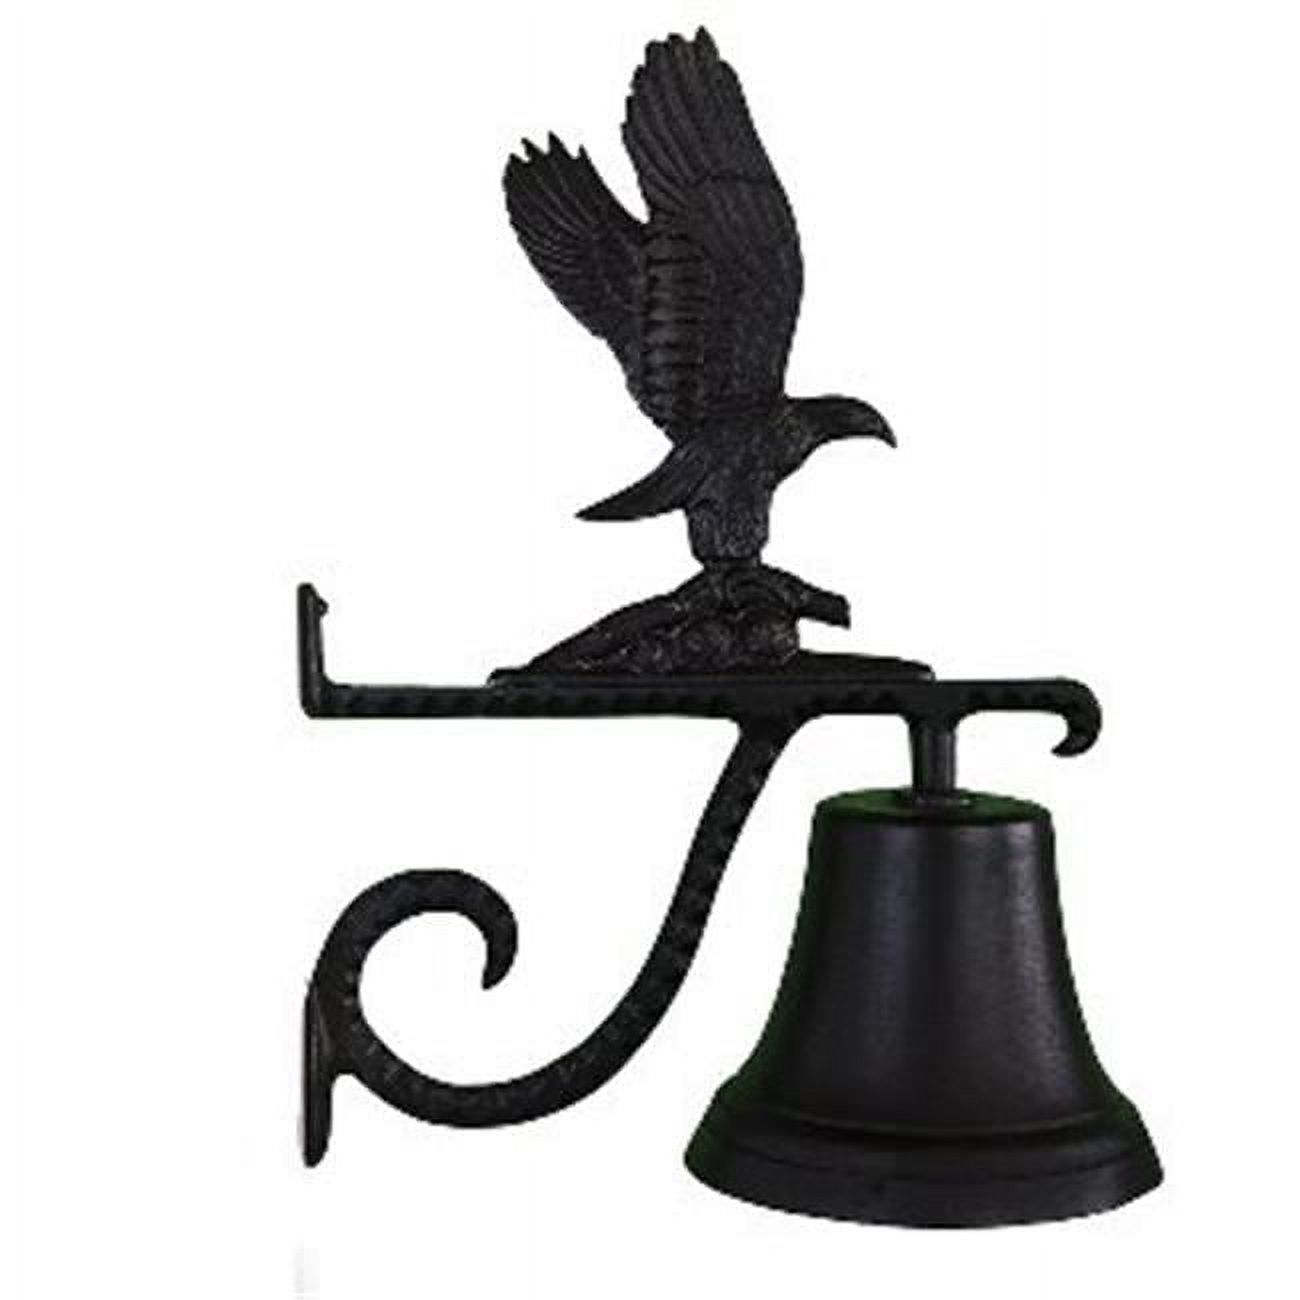 Montague Metal Products CB-1-72-SB Cast Bell With Satin Black Eagle Ornament - image 1 of 1